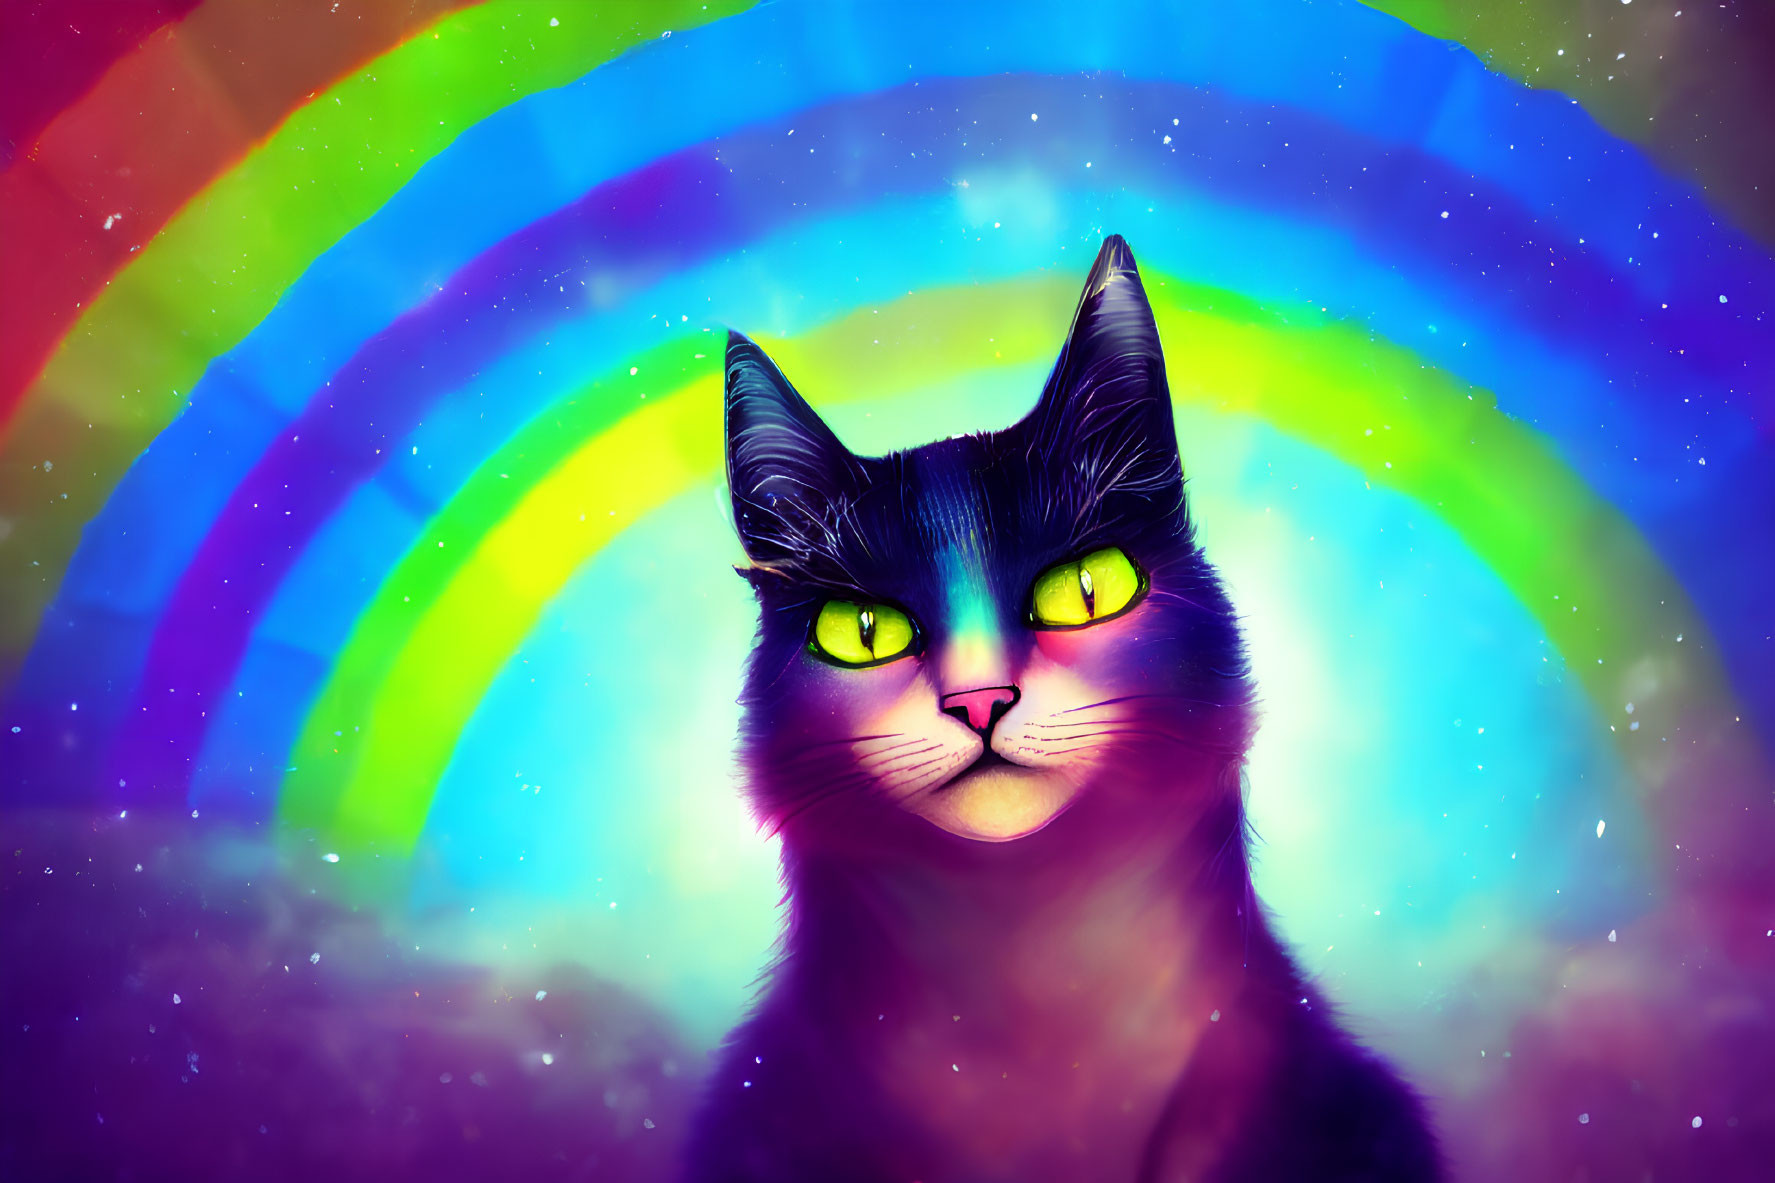 Colorful Illustration of Black Cat with Green Eyes on Rainbow Background